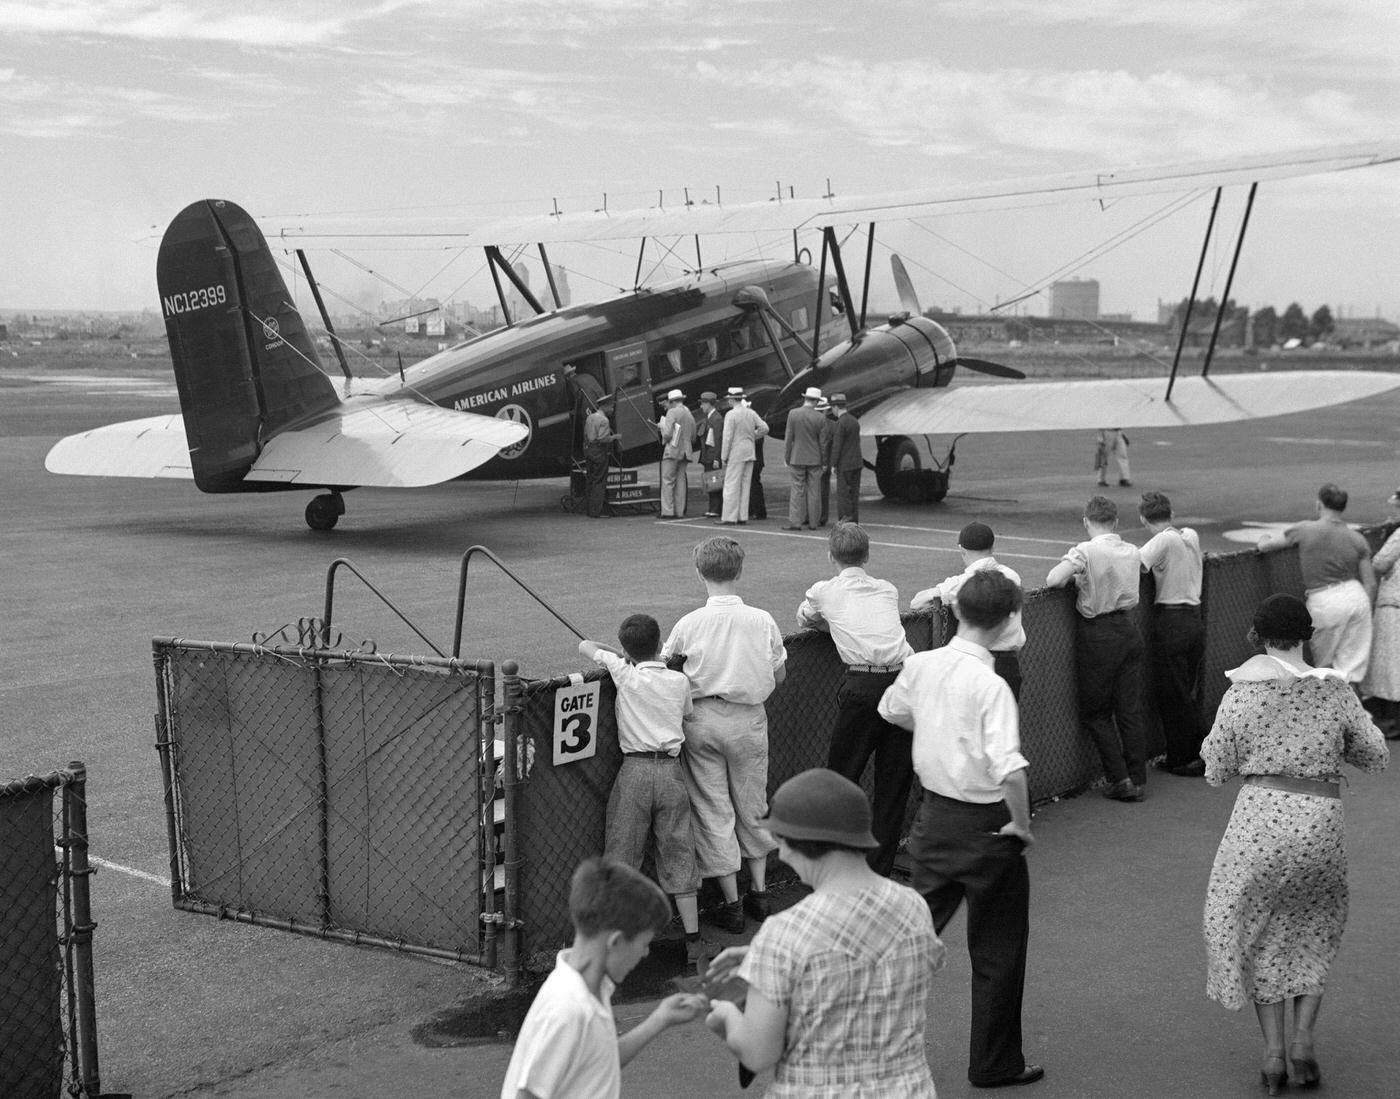 Passengers board an American Airlines Condor biplane airplane for commercial flight from Newark, New Jersey, 1930s